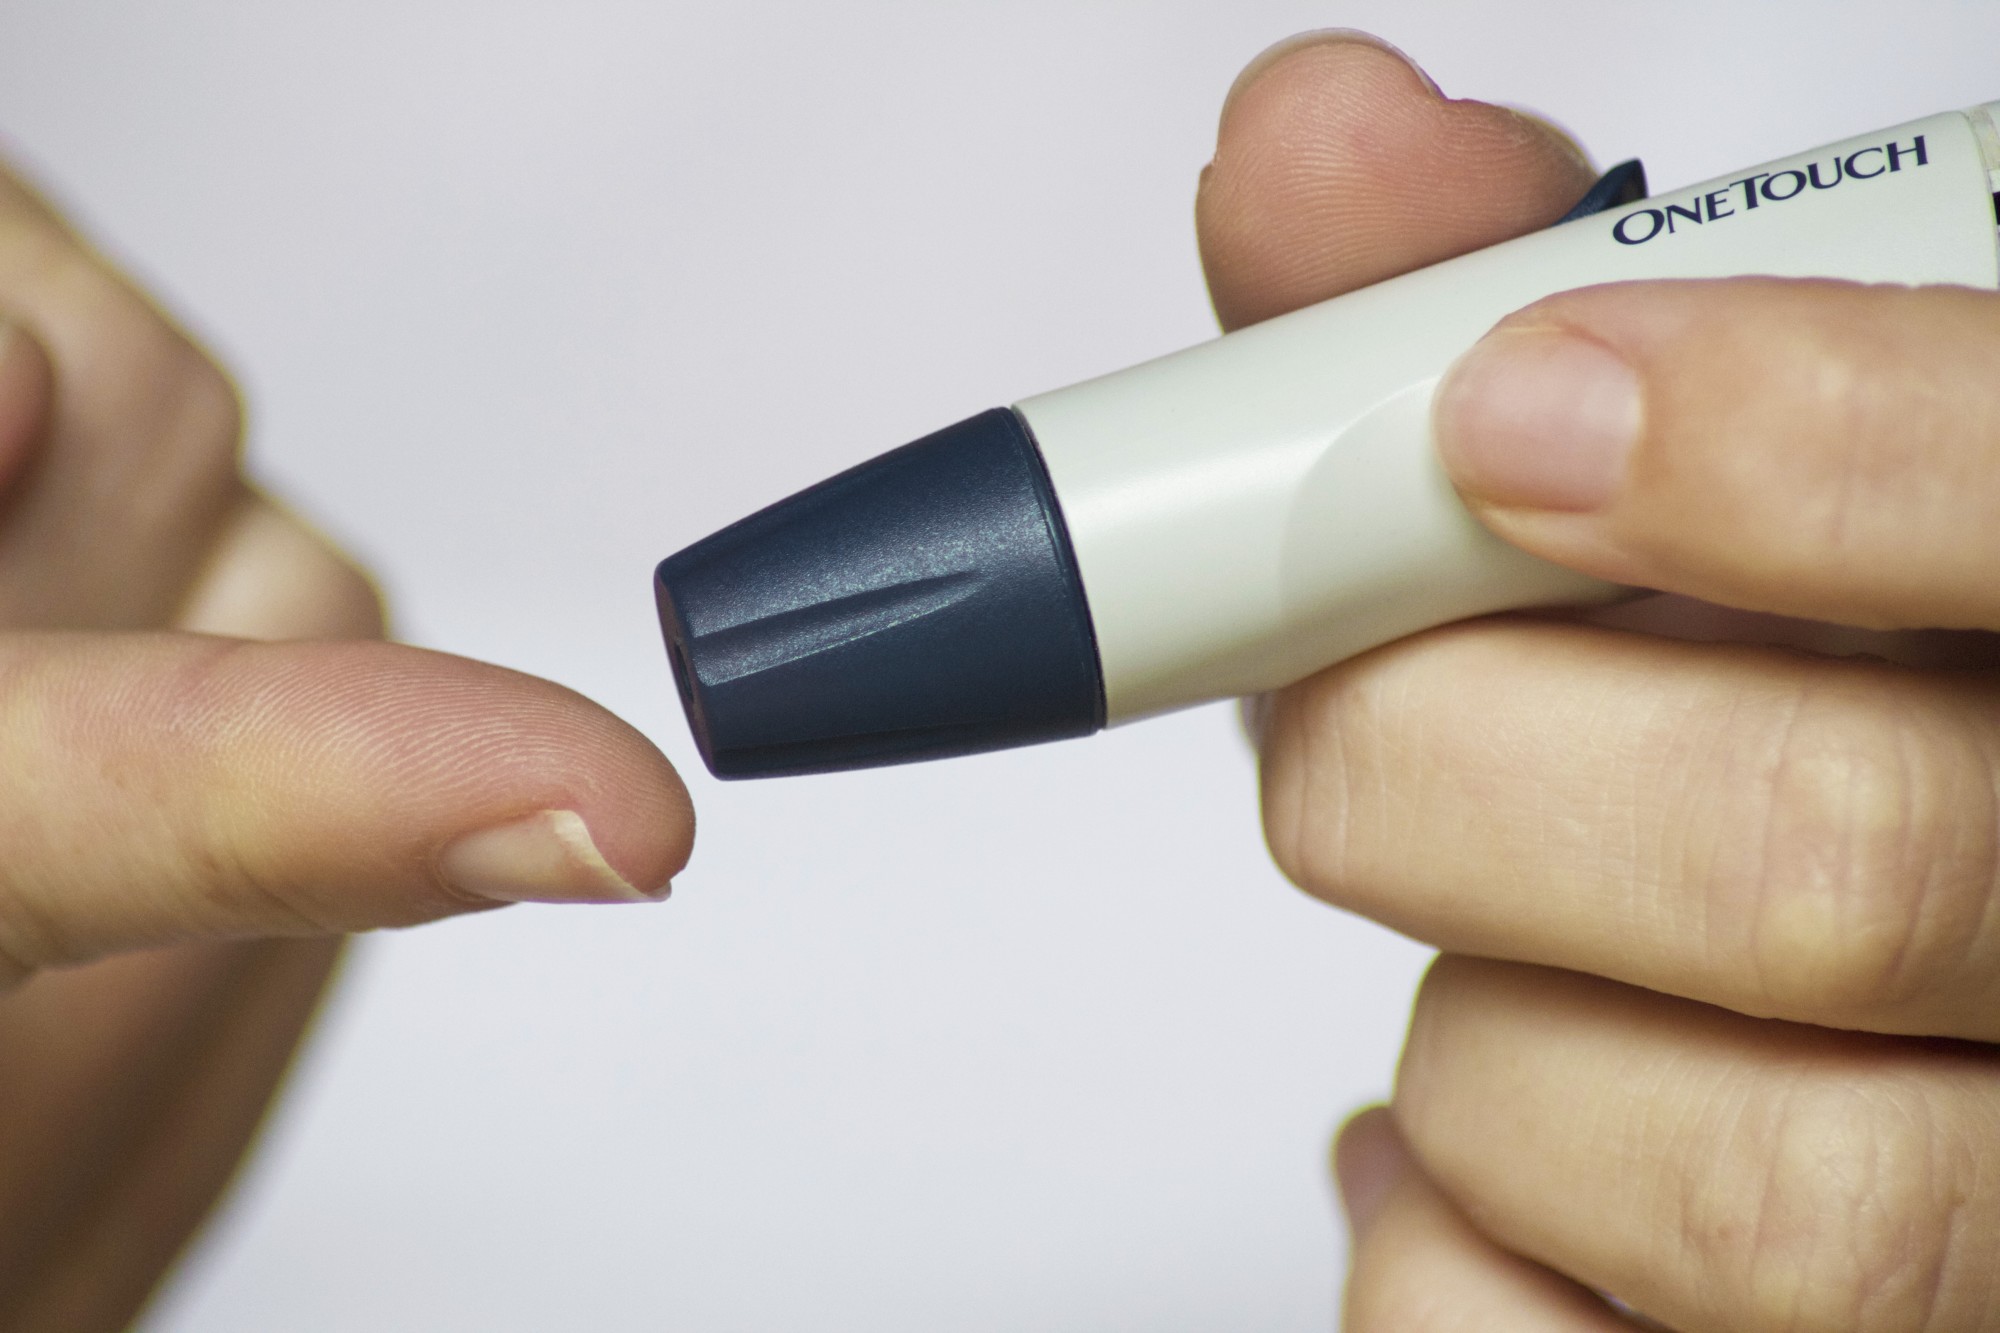 Type 1 vs type 2 diabetes: How much do you know about the differences between the two? Read on to learn more about the differences between them.